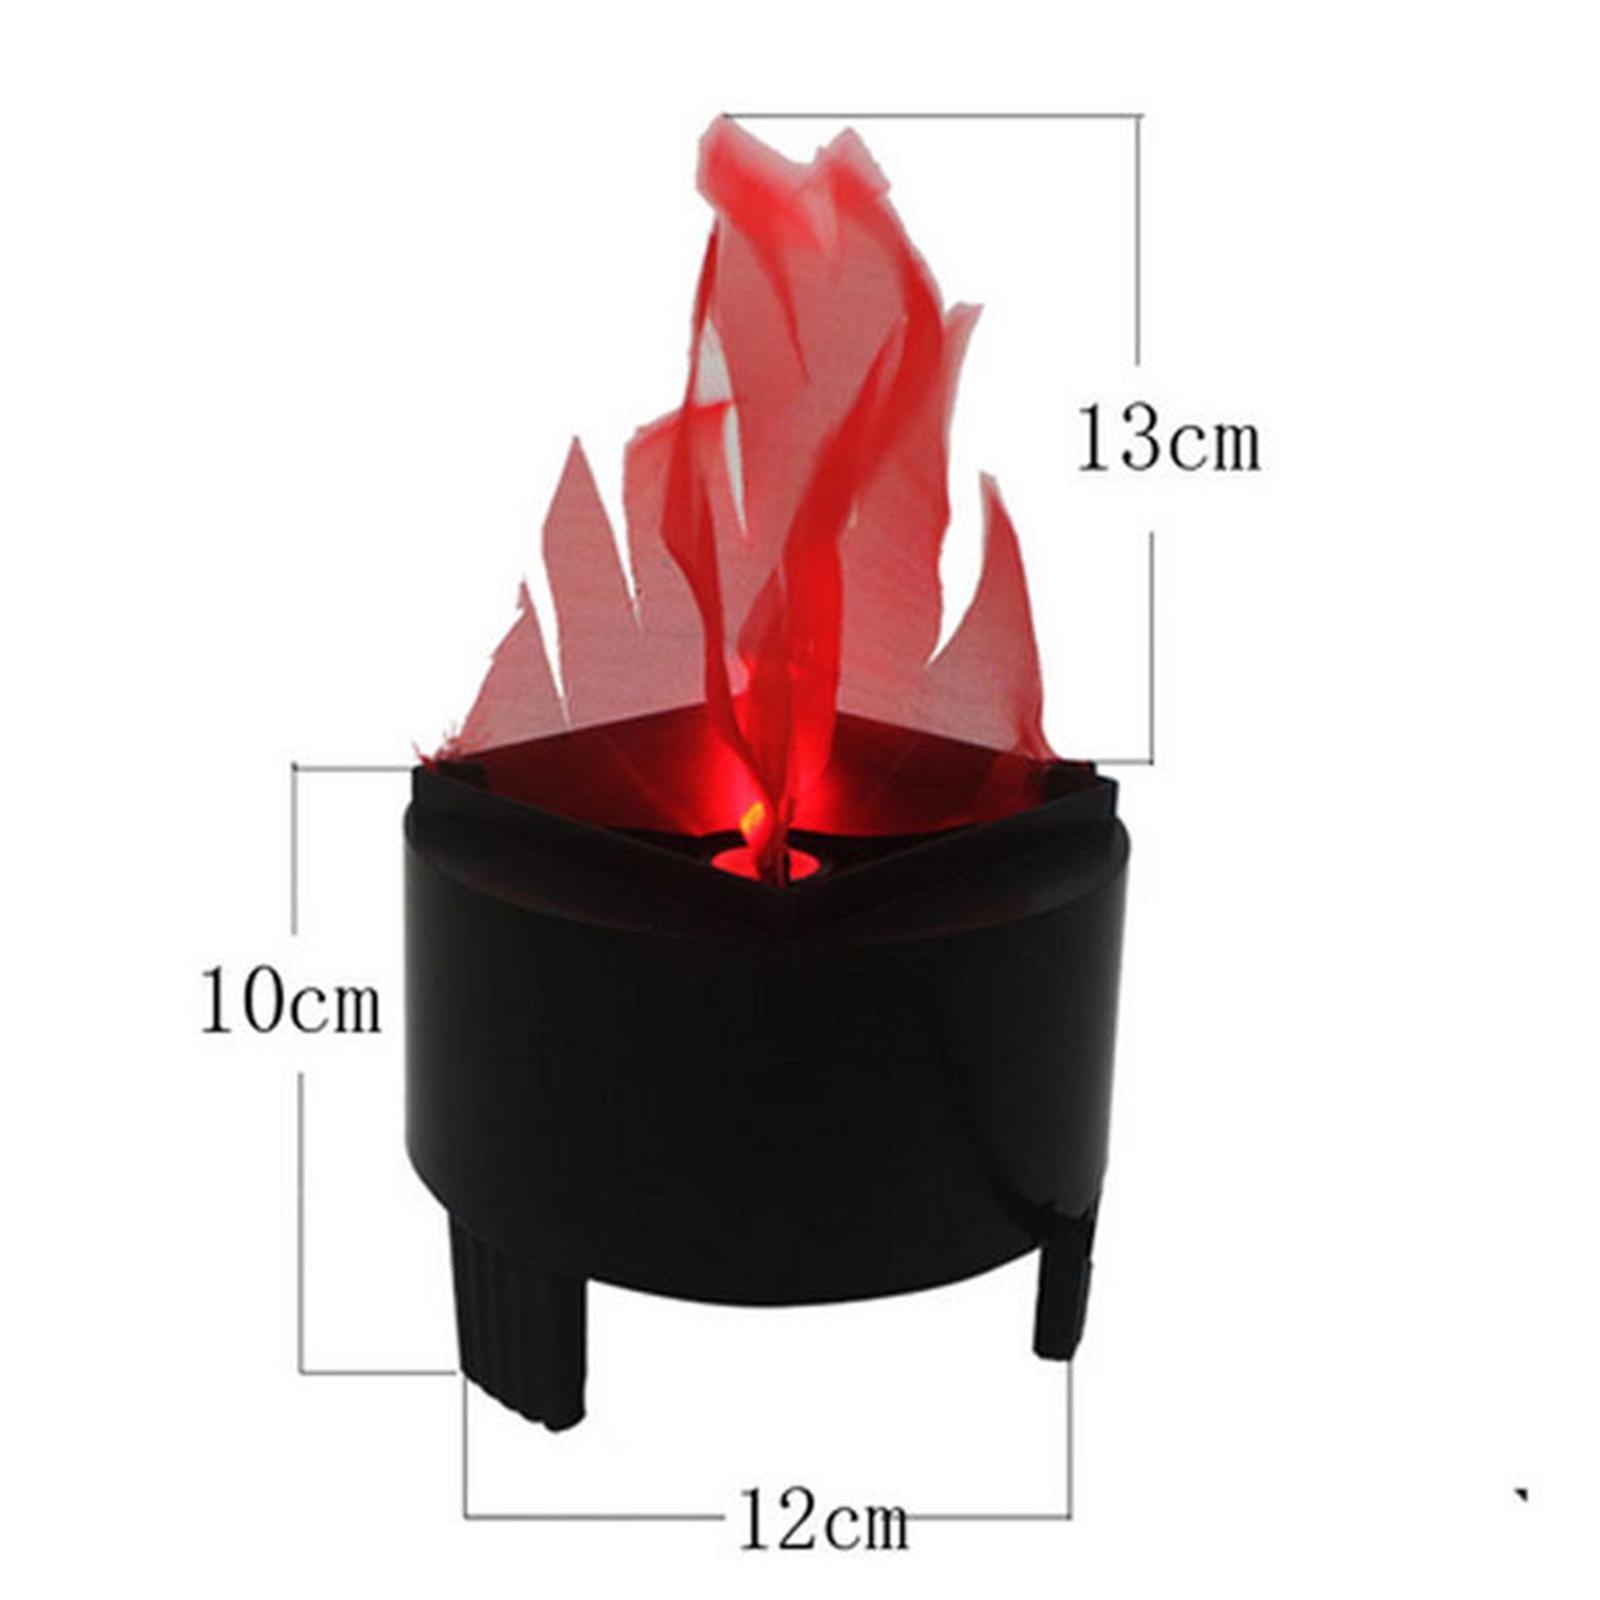 LED Fake Flame Light Torch Light Electronic Flame Lamp Party Club Home Decor